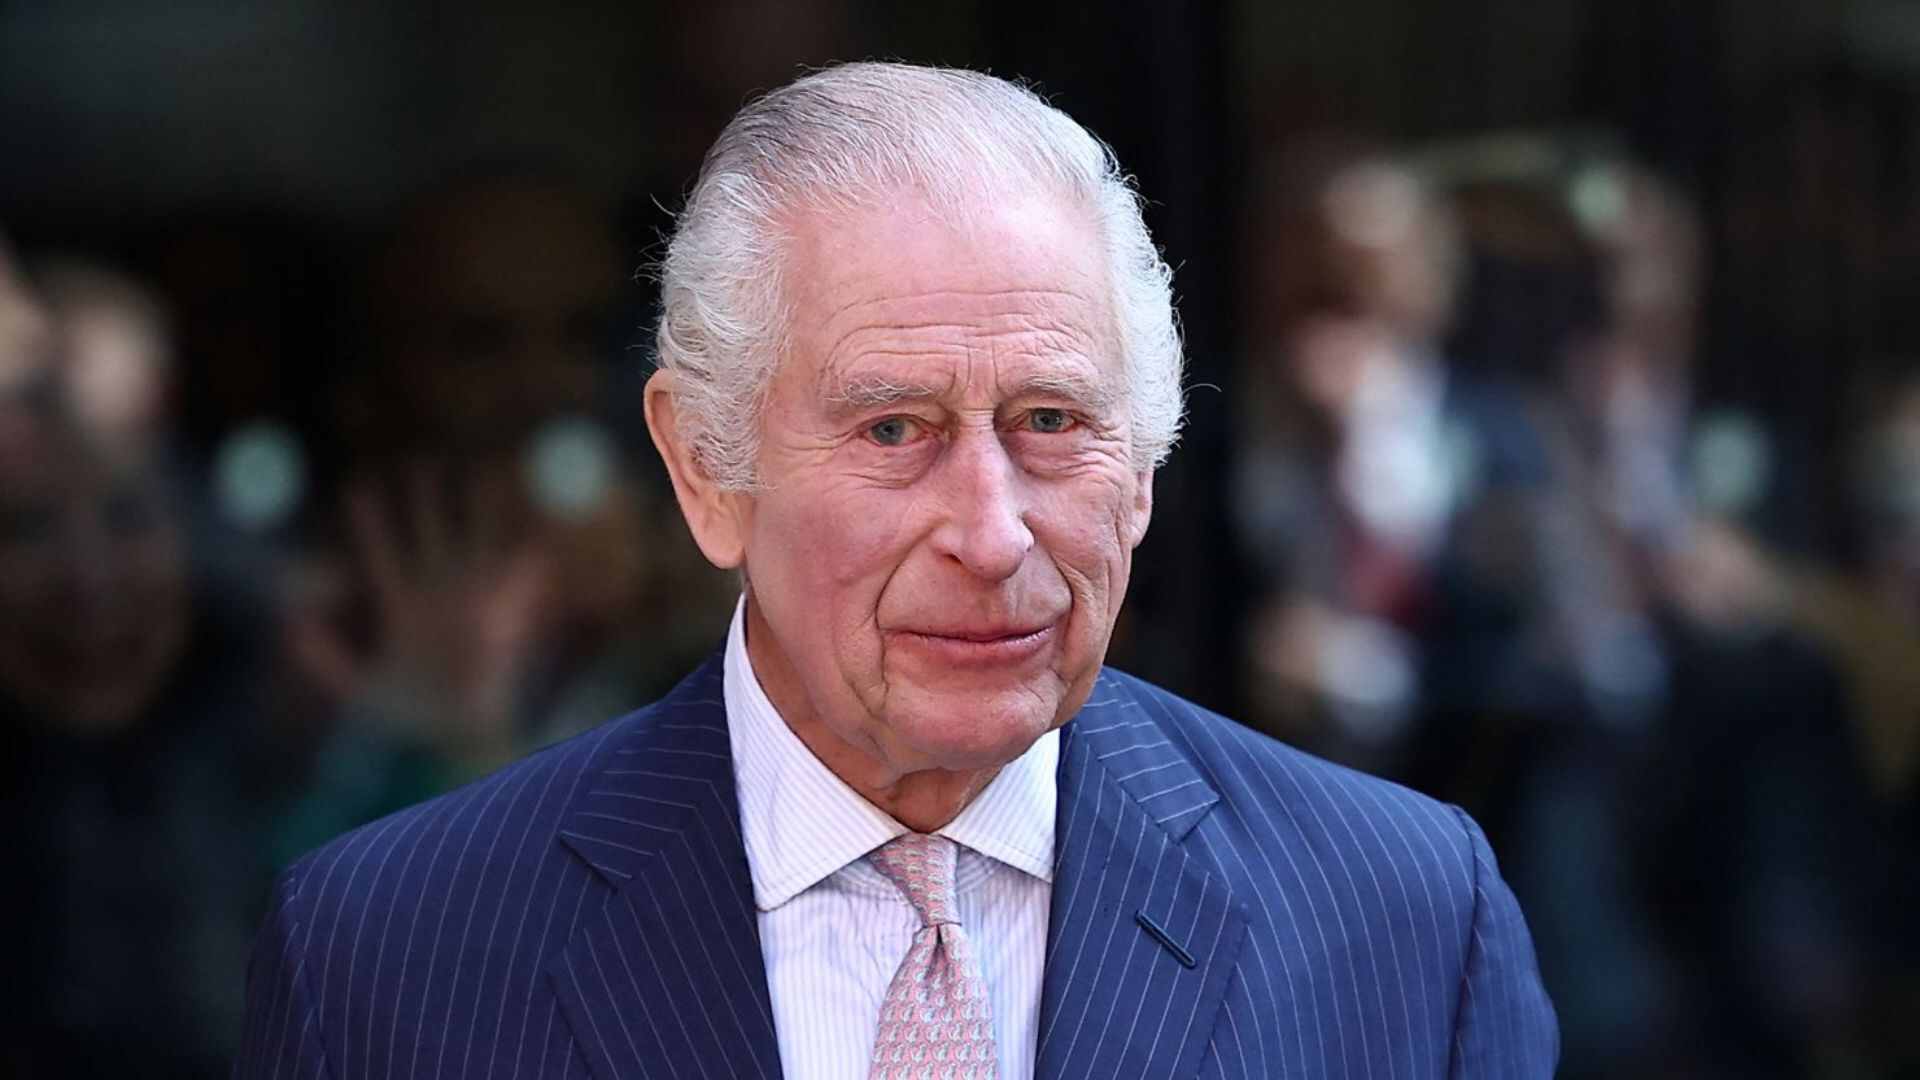 King Charles III Returns to Royal Duties After Cancer Treatment Center Visit